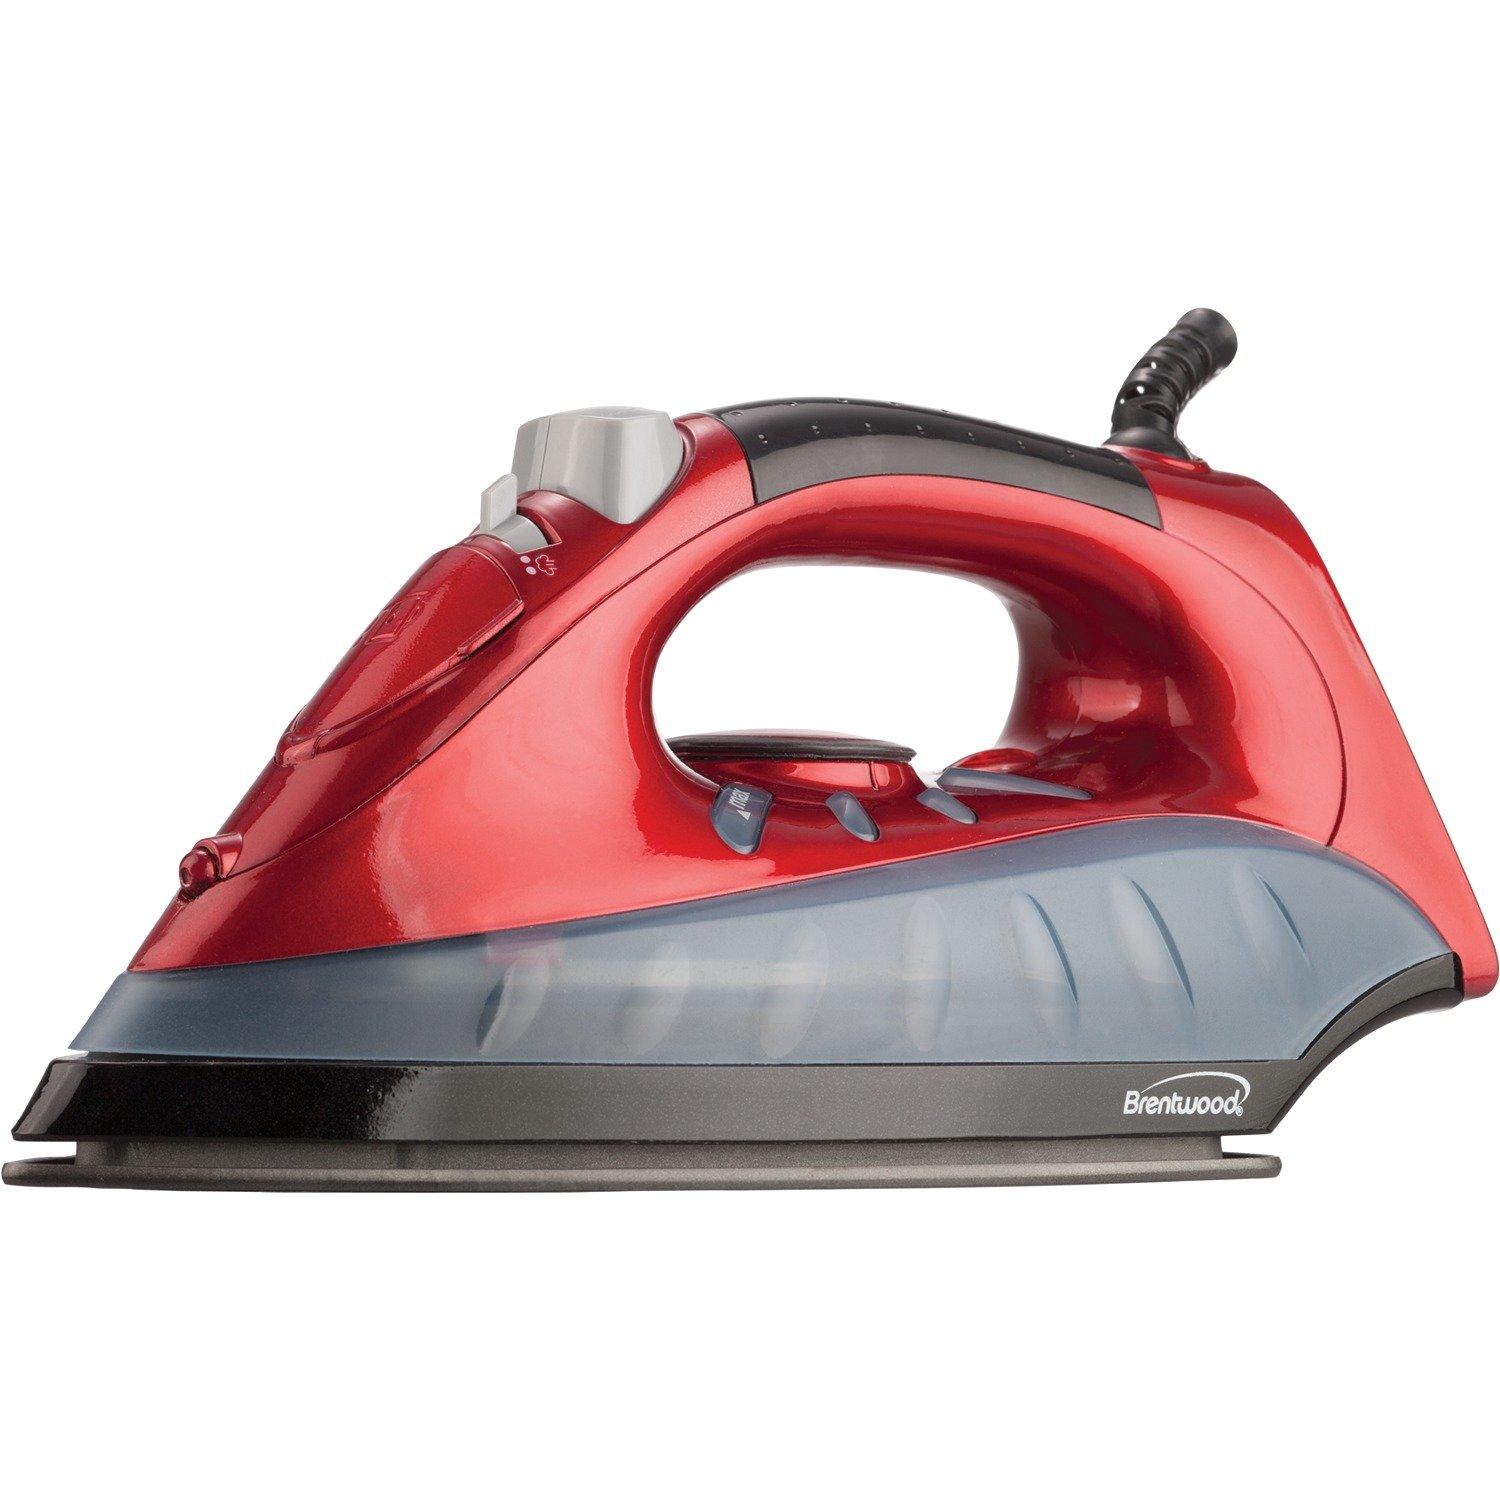 BRENTWOOD® MPI- 61 FULL-SIZE NONSTICK STEAM IRON (Red)